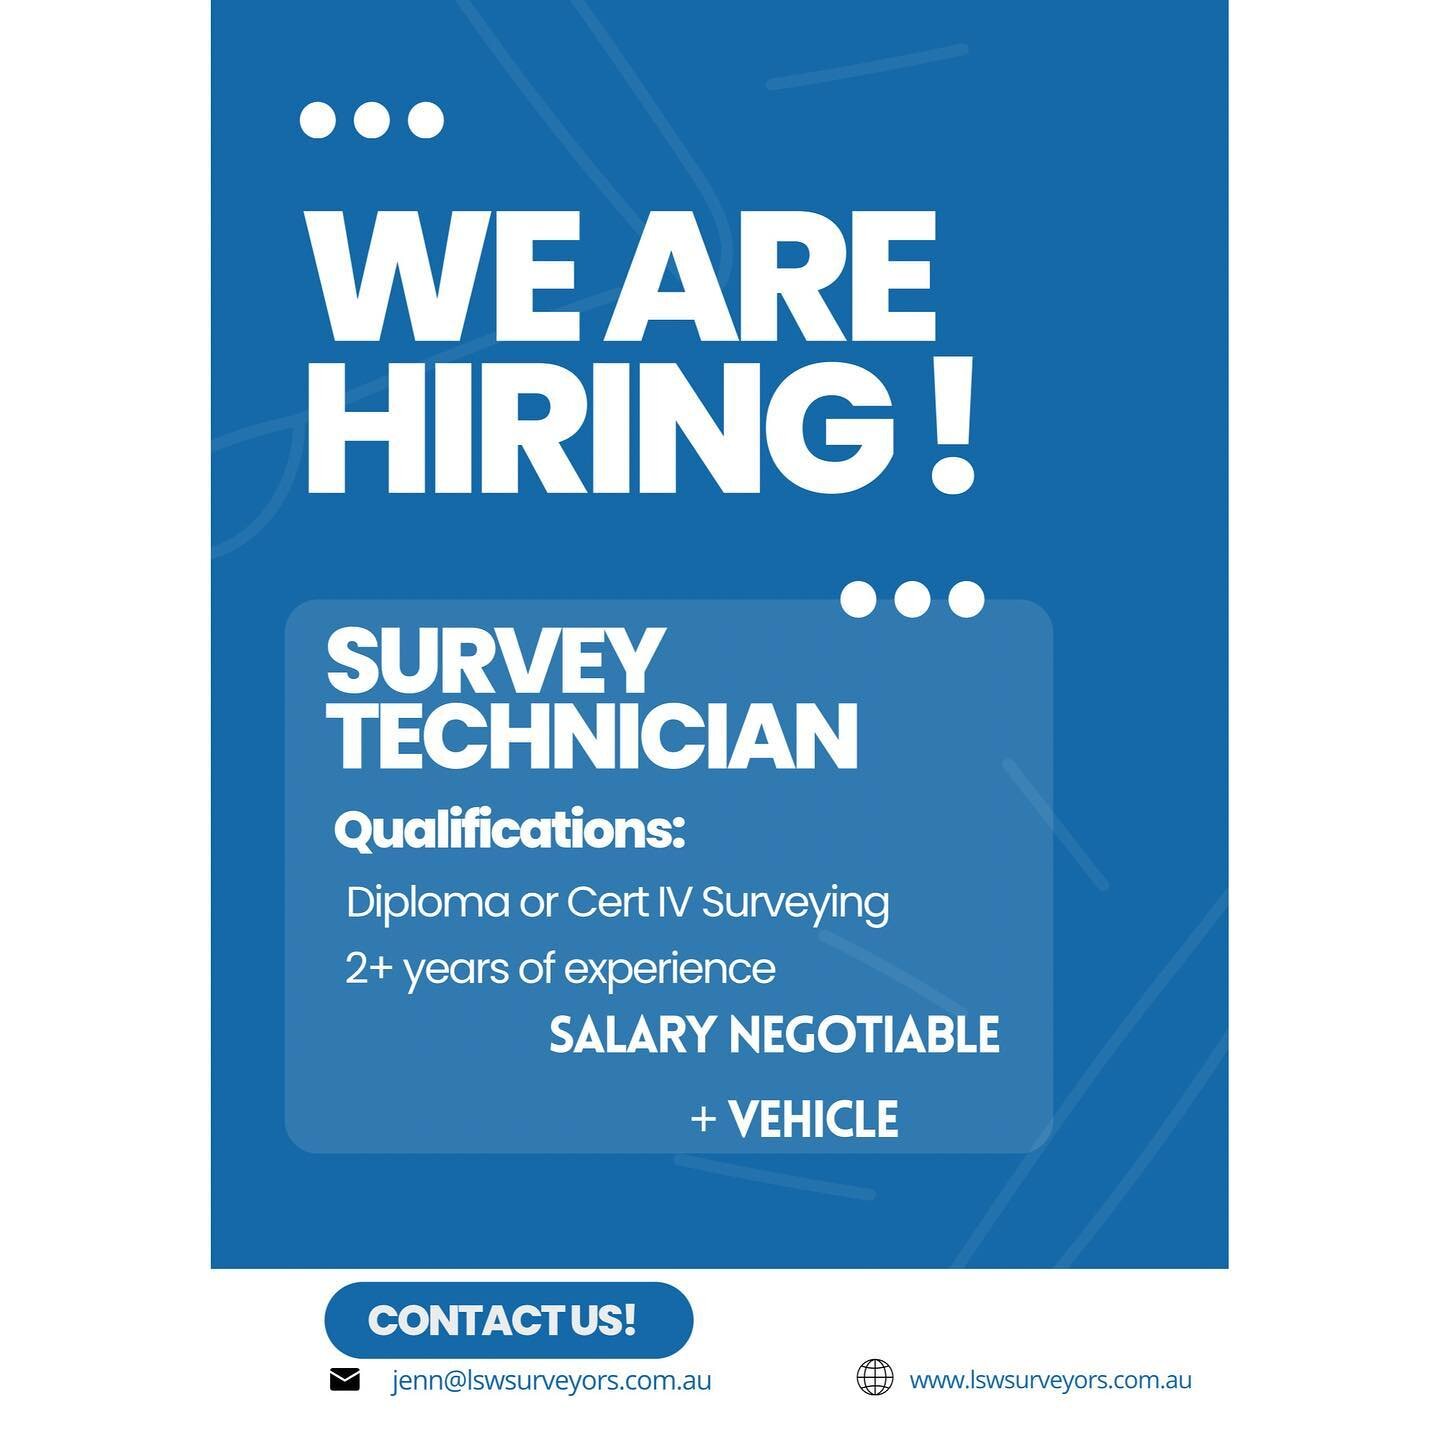 Are you a SURVEY TECHNICIAN / SURVEYOR ? 
We would love to talk to YOU! Times are crazy and we need a SURVEY TECHNICIAN to join us! FORSTER is a great place to live (&amp; work!) where you really can have your CAKE and EAT it too! 
.
.
.
#lswsurveyor